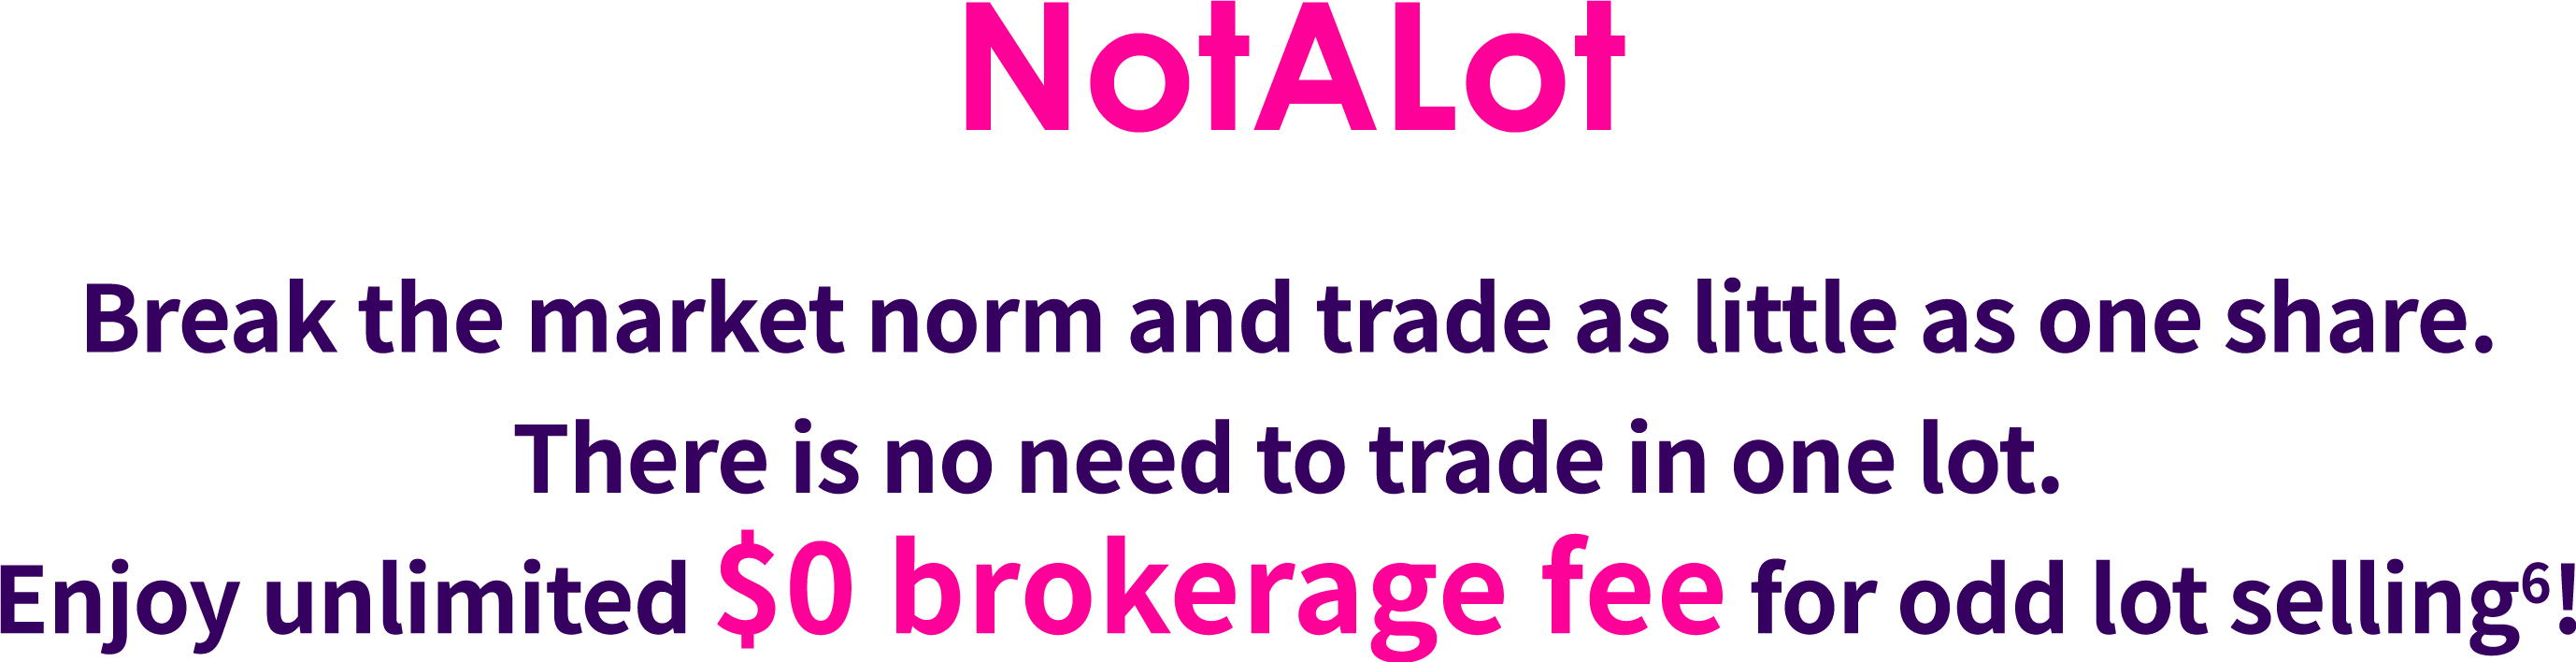 NotALot Break the market norm and trade as little as 1 share. No need to trade one lot. Enjoy unlimited $0 brokerage fees when selling odd lots.